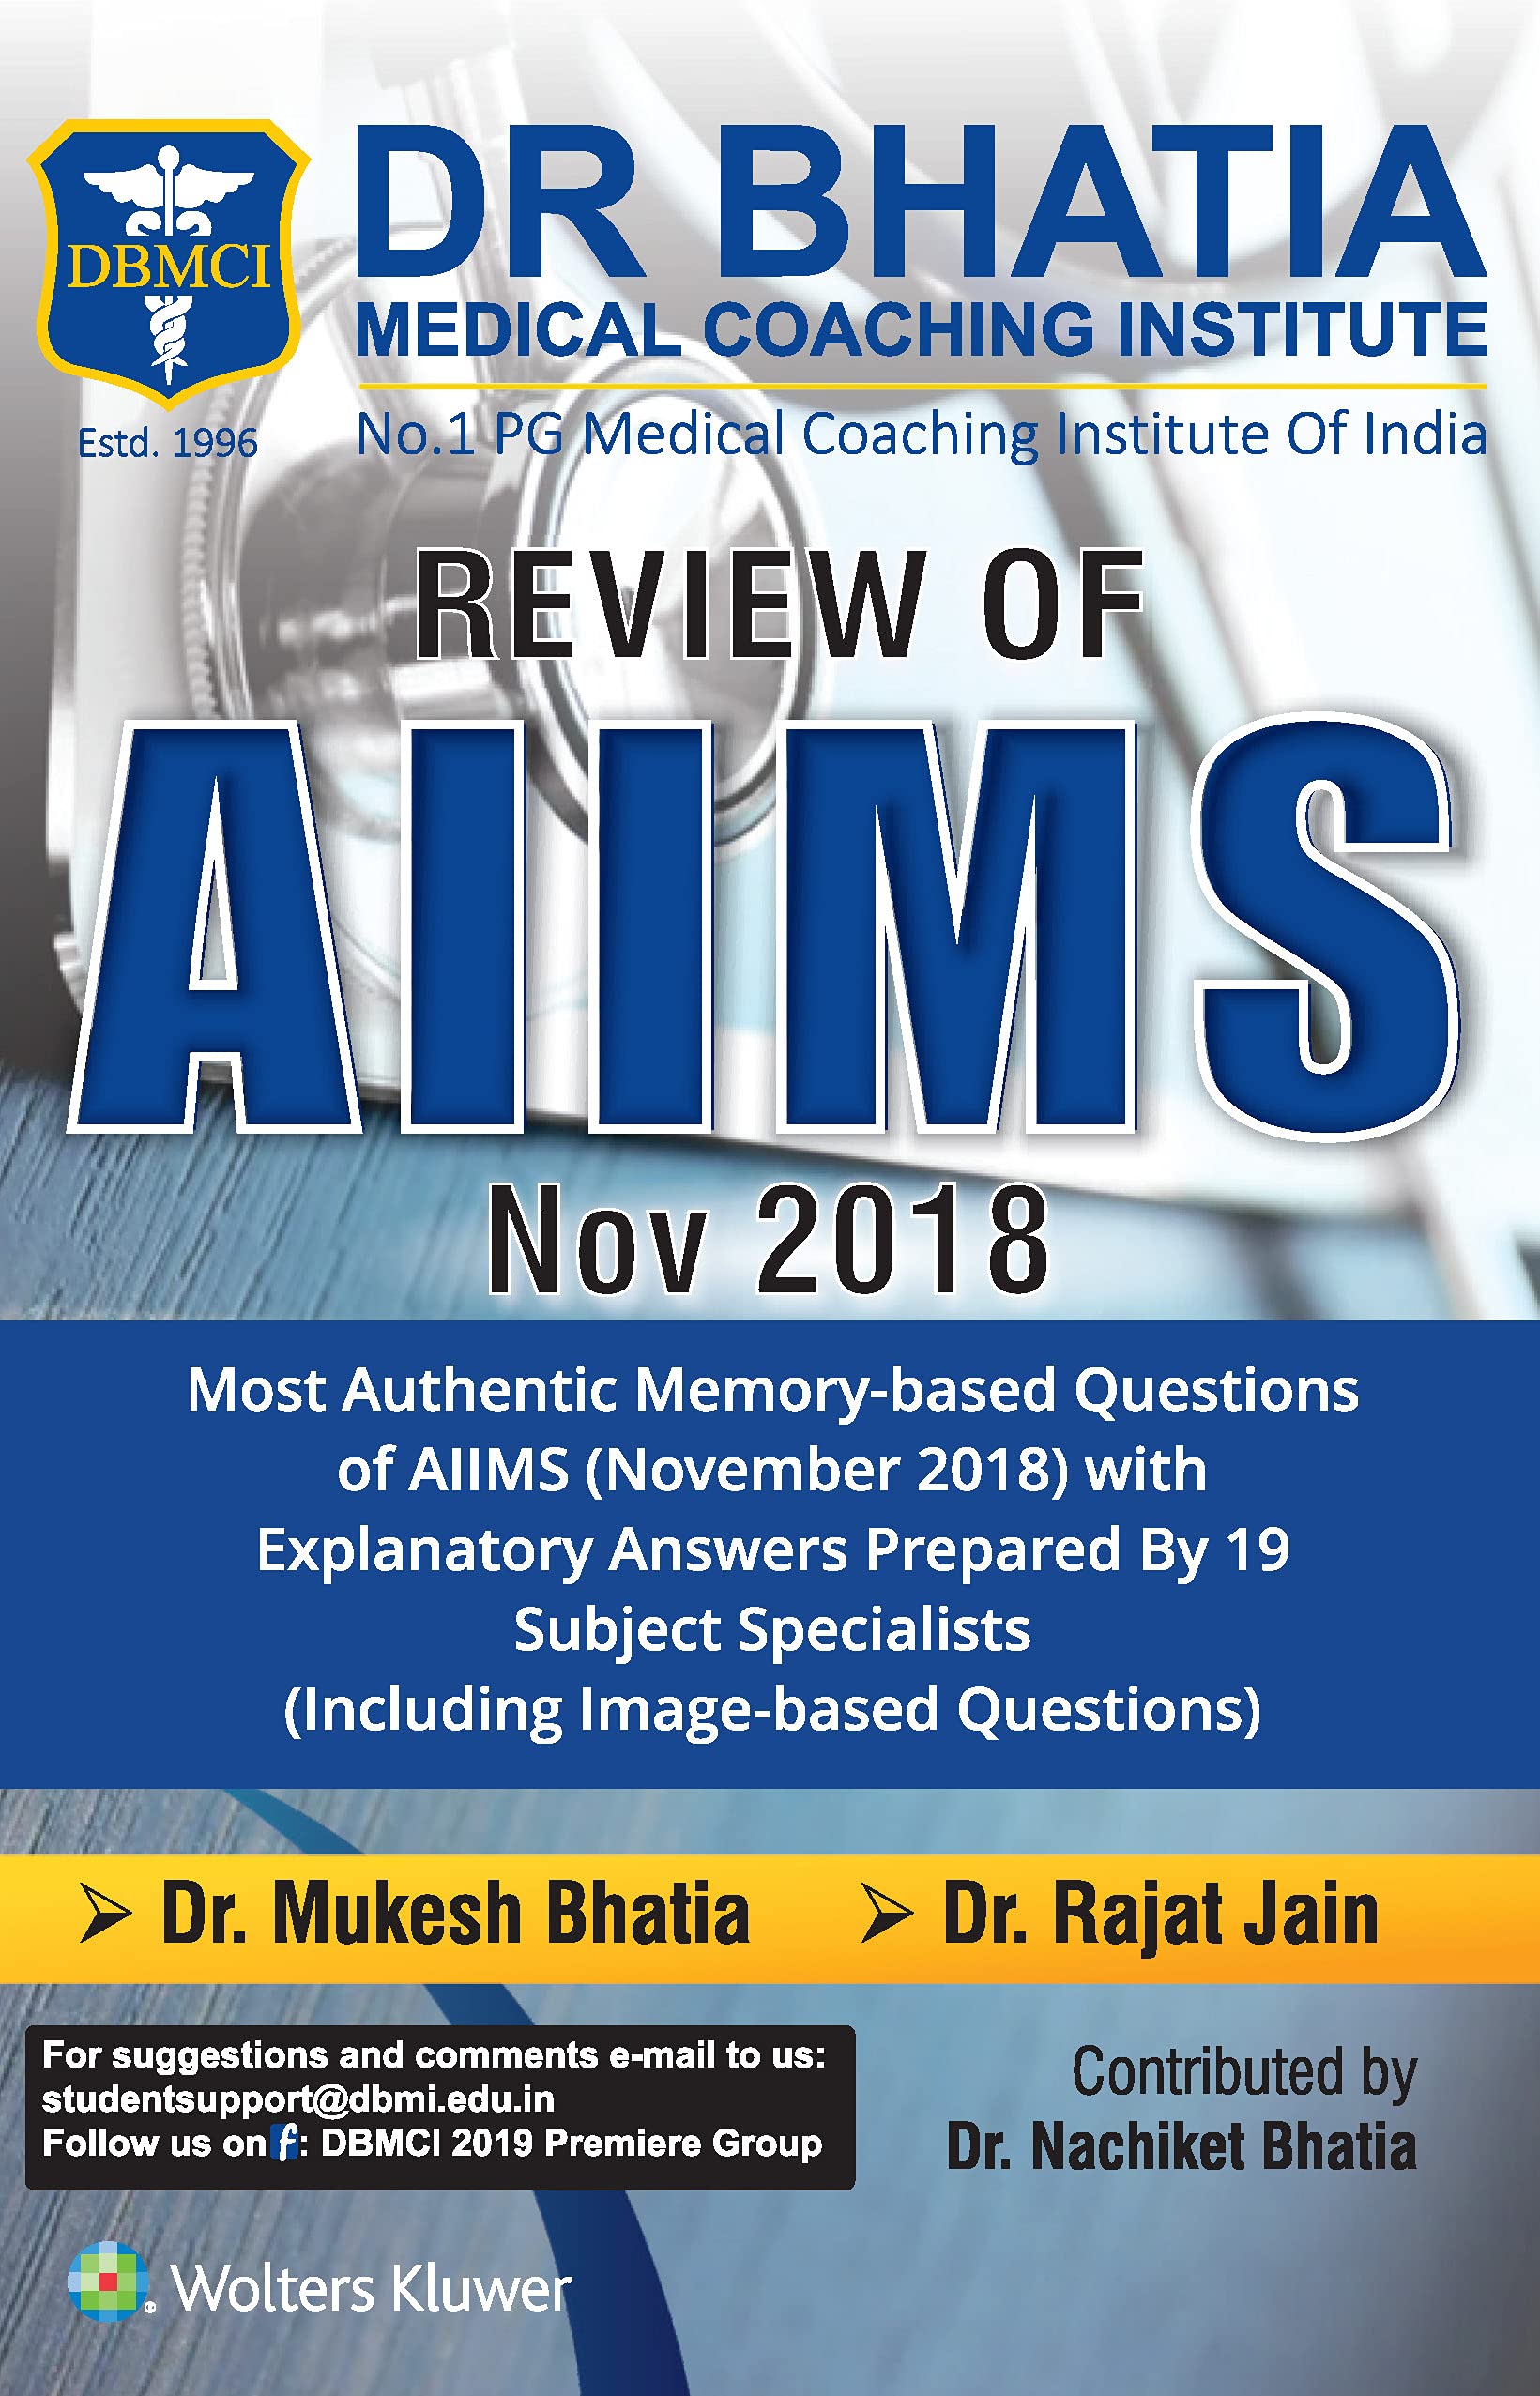 Review of AIIMS - November 2018 by Bhatia